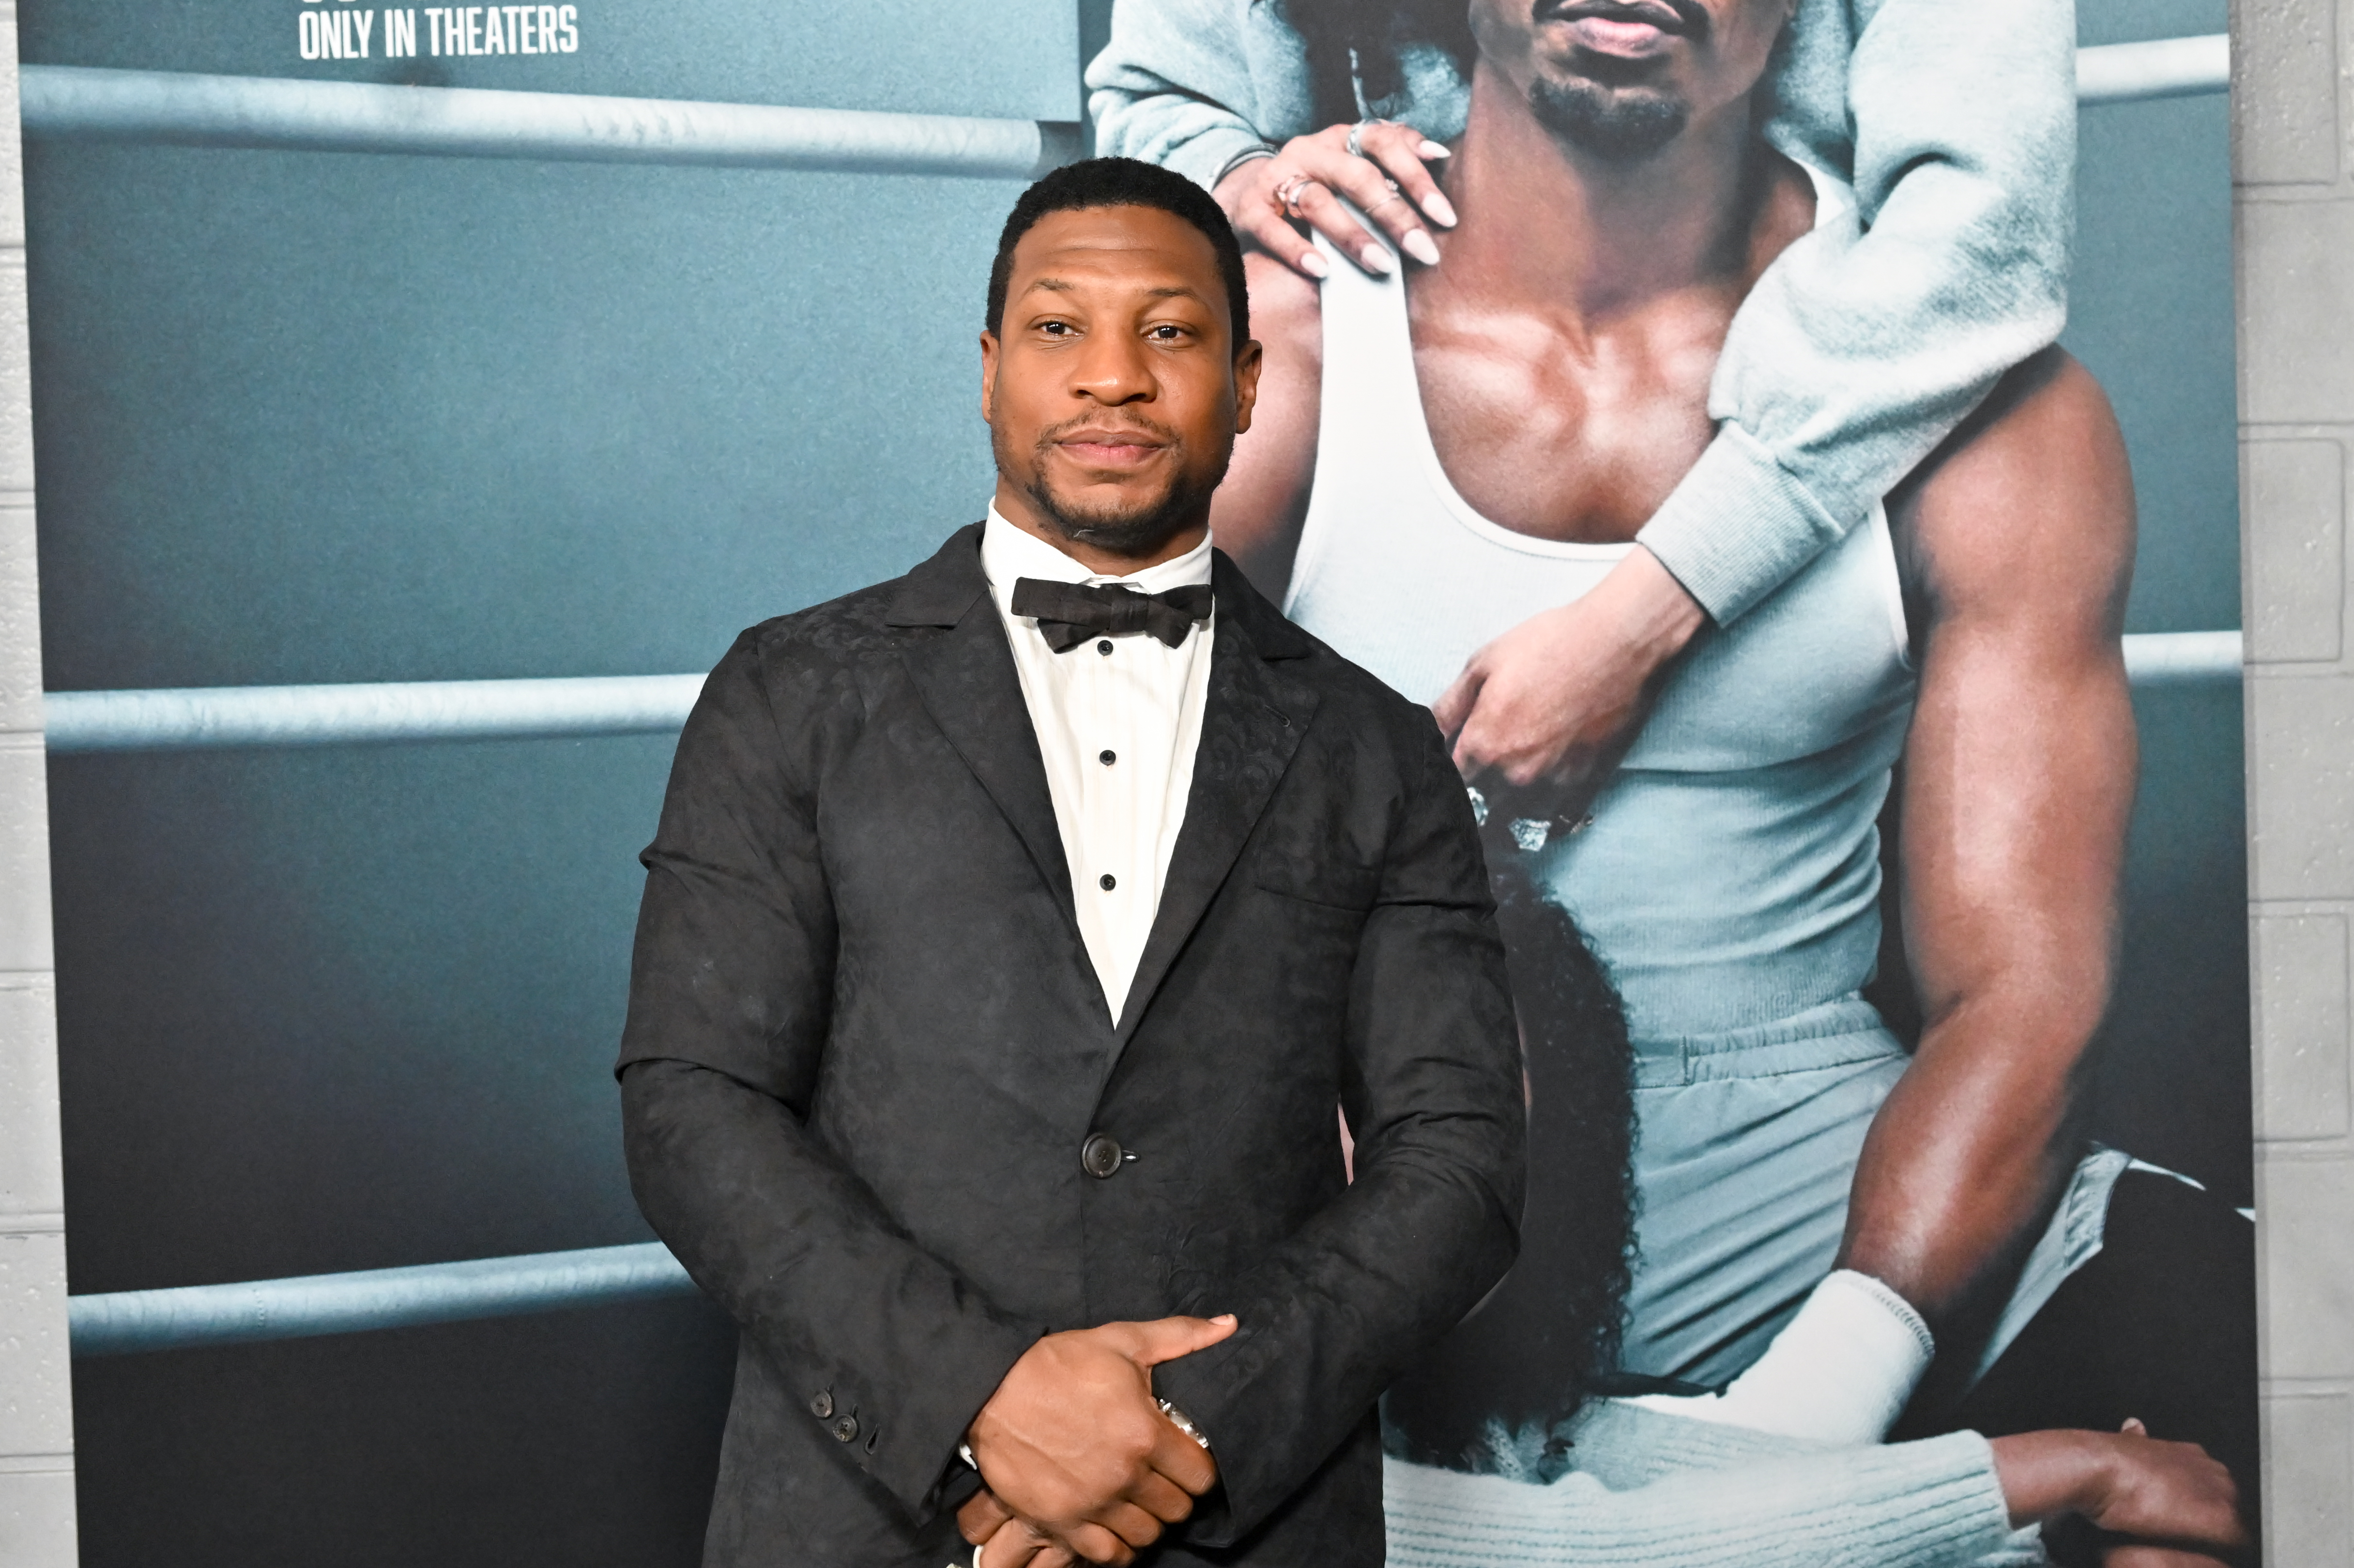 Meagan Good Supporting Jonathan Majors Amid Allegations: Report